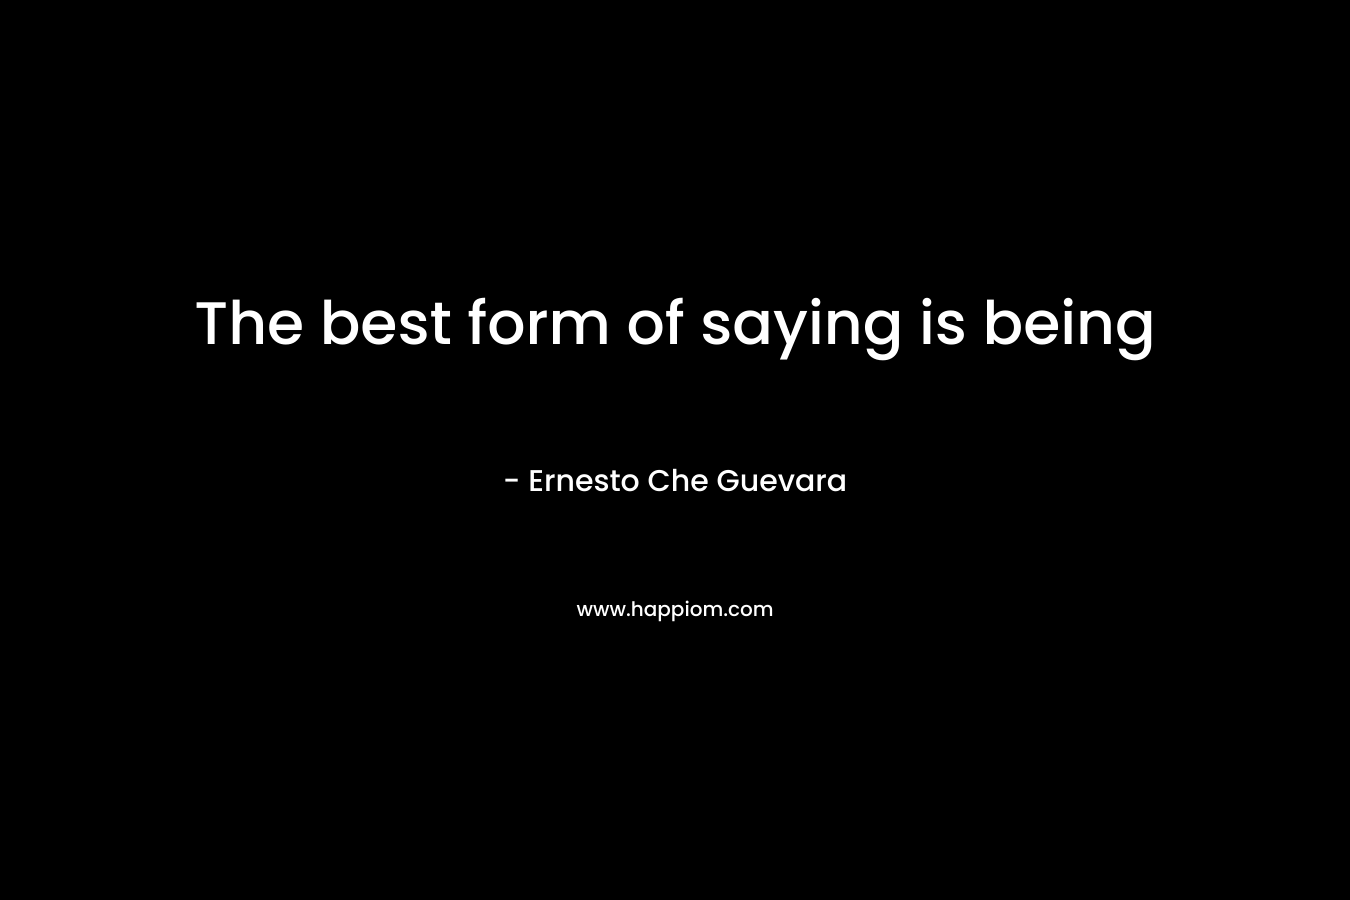 The best form of saying is being